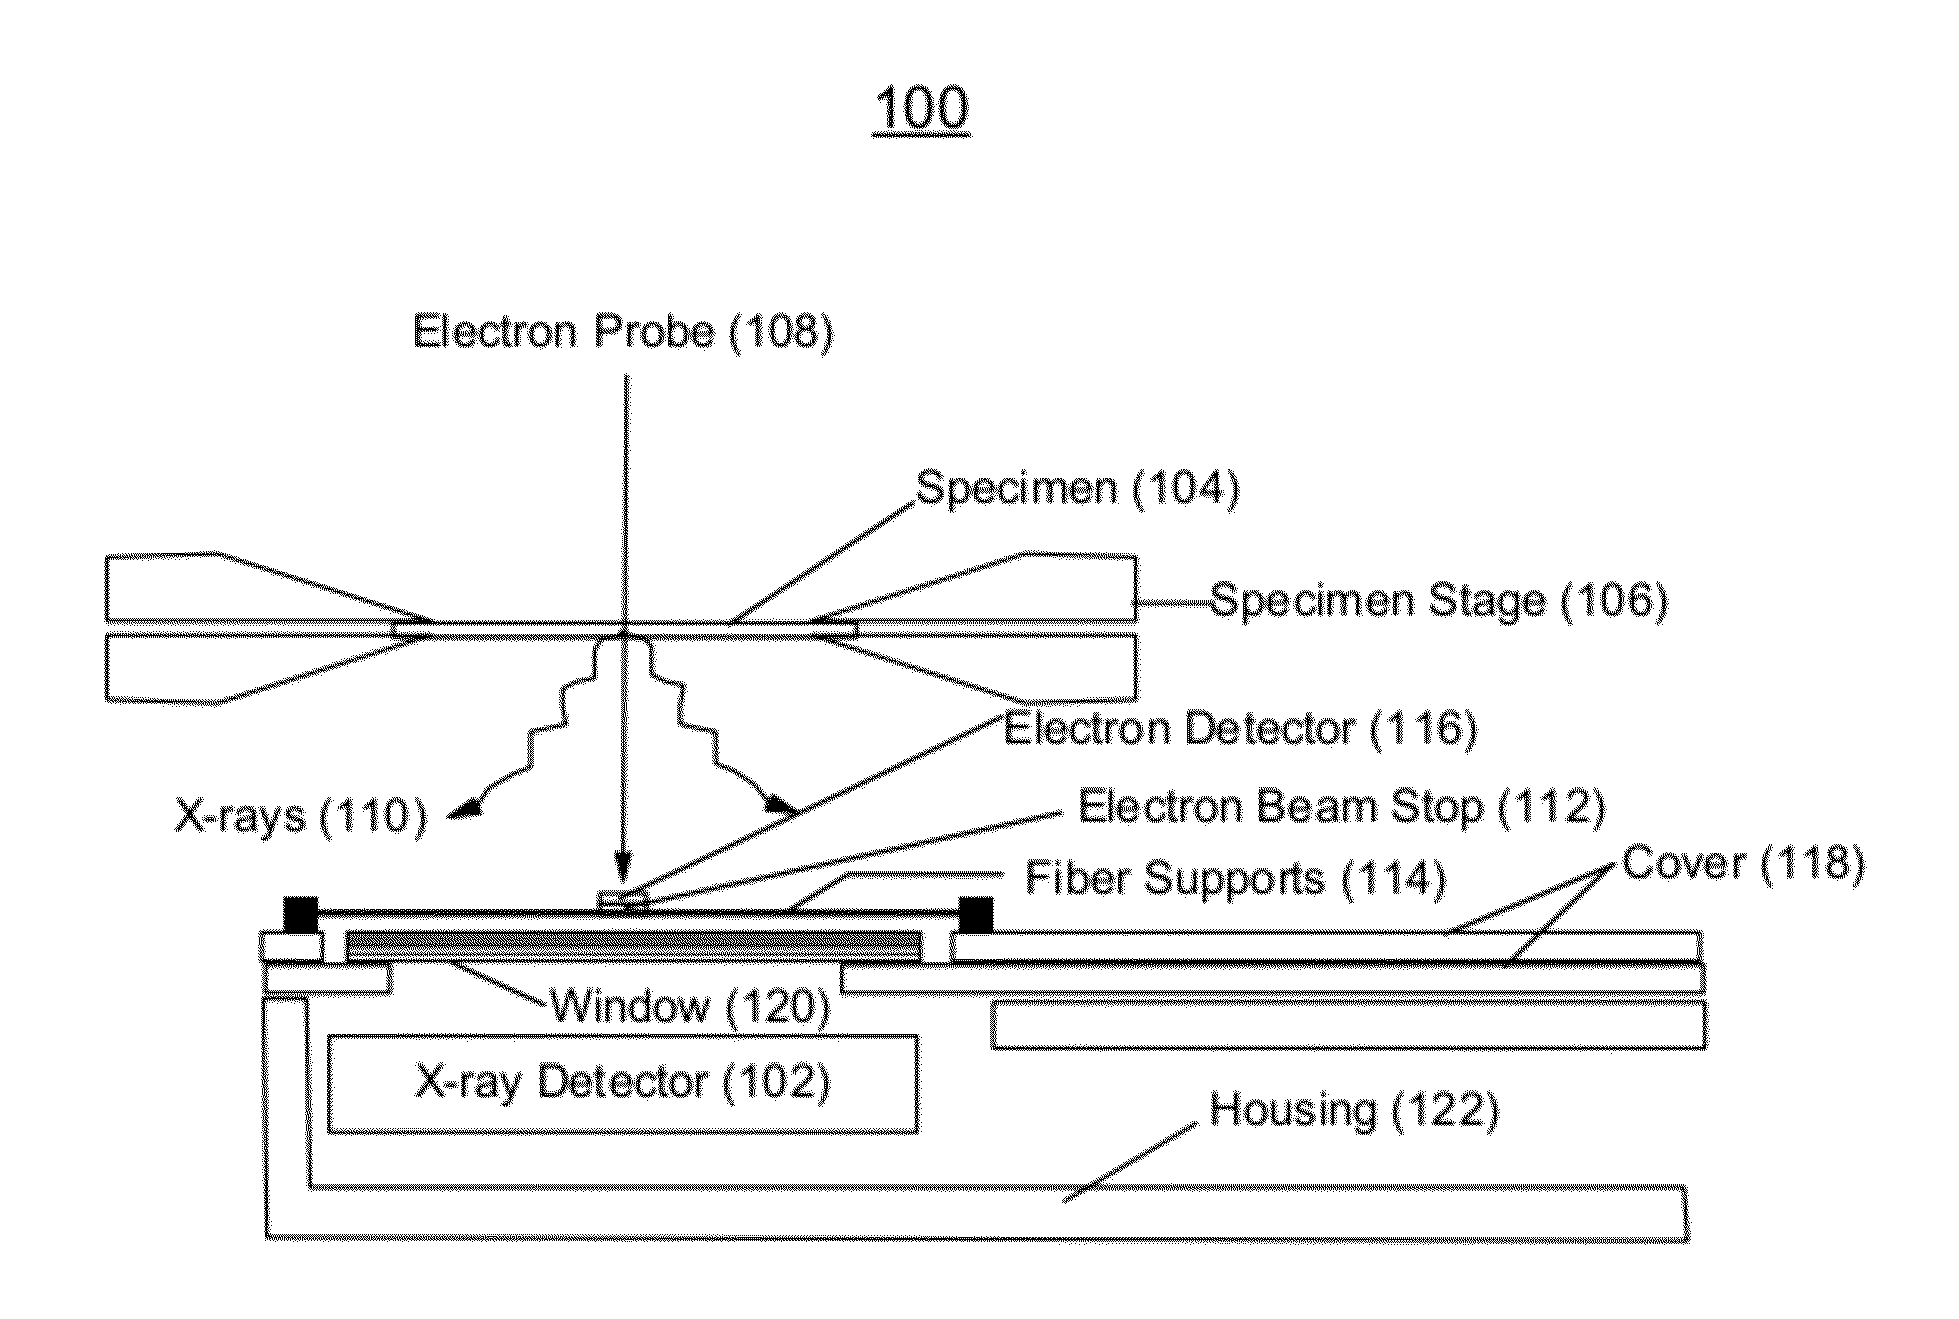 High collection efficiency x-ray spectrometer system with integrated electron beam stop, electron detector and x-ray detector for use on electron-optical beam lines and microscopes